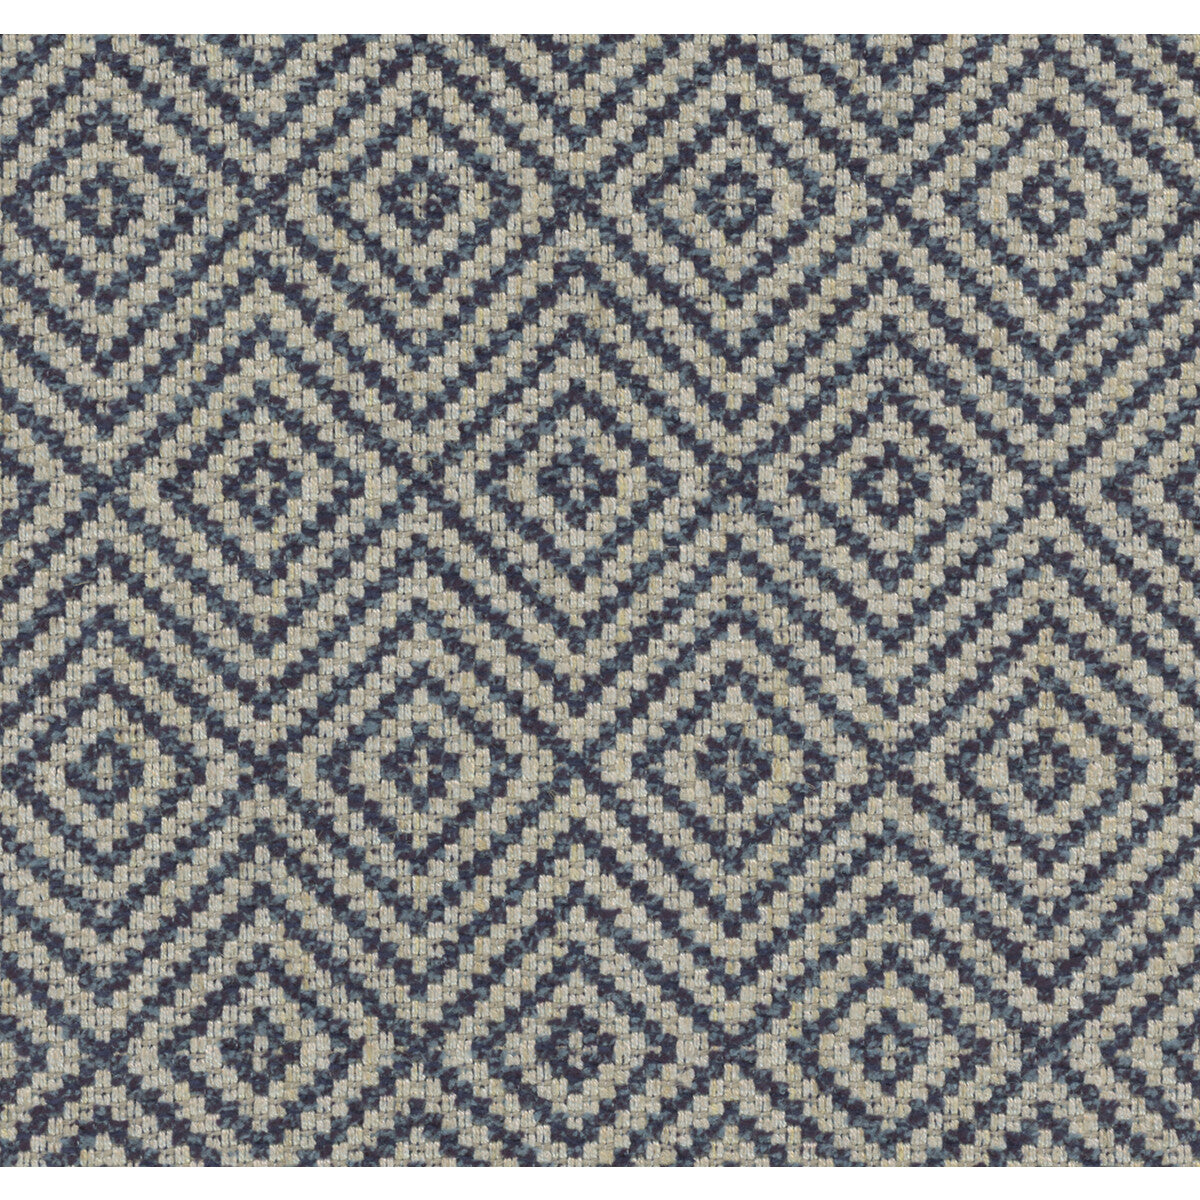 Focal Point fabric in navy color - pattern 34399.5011.0 - by Kravet Couture